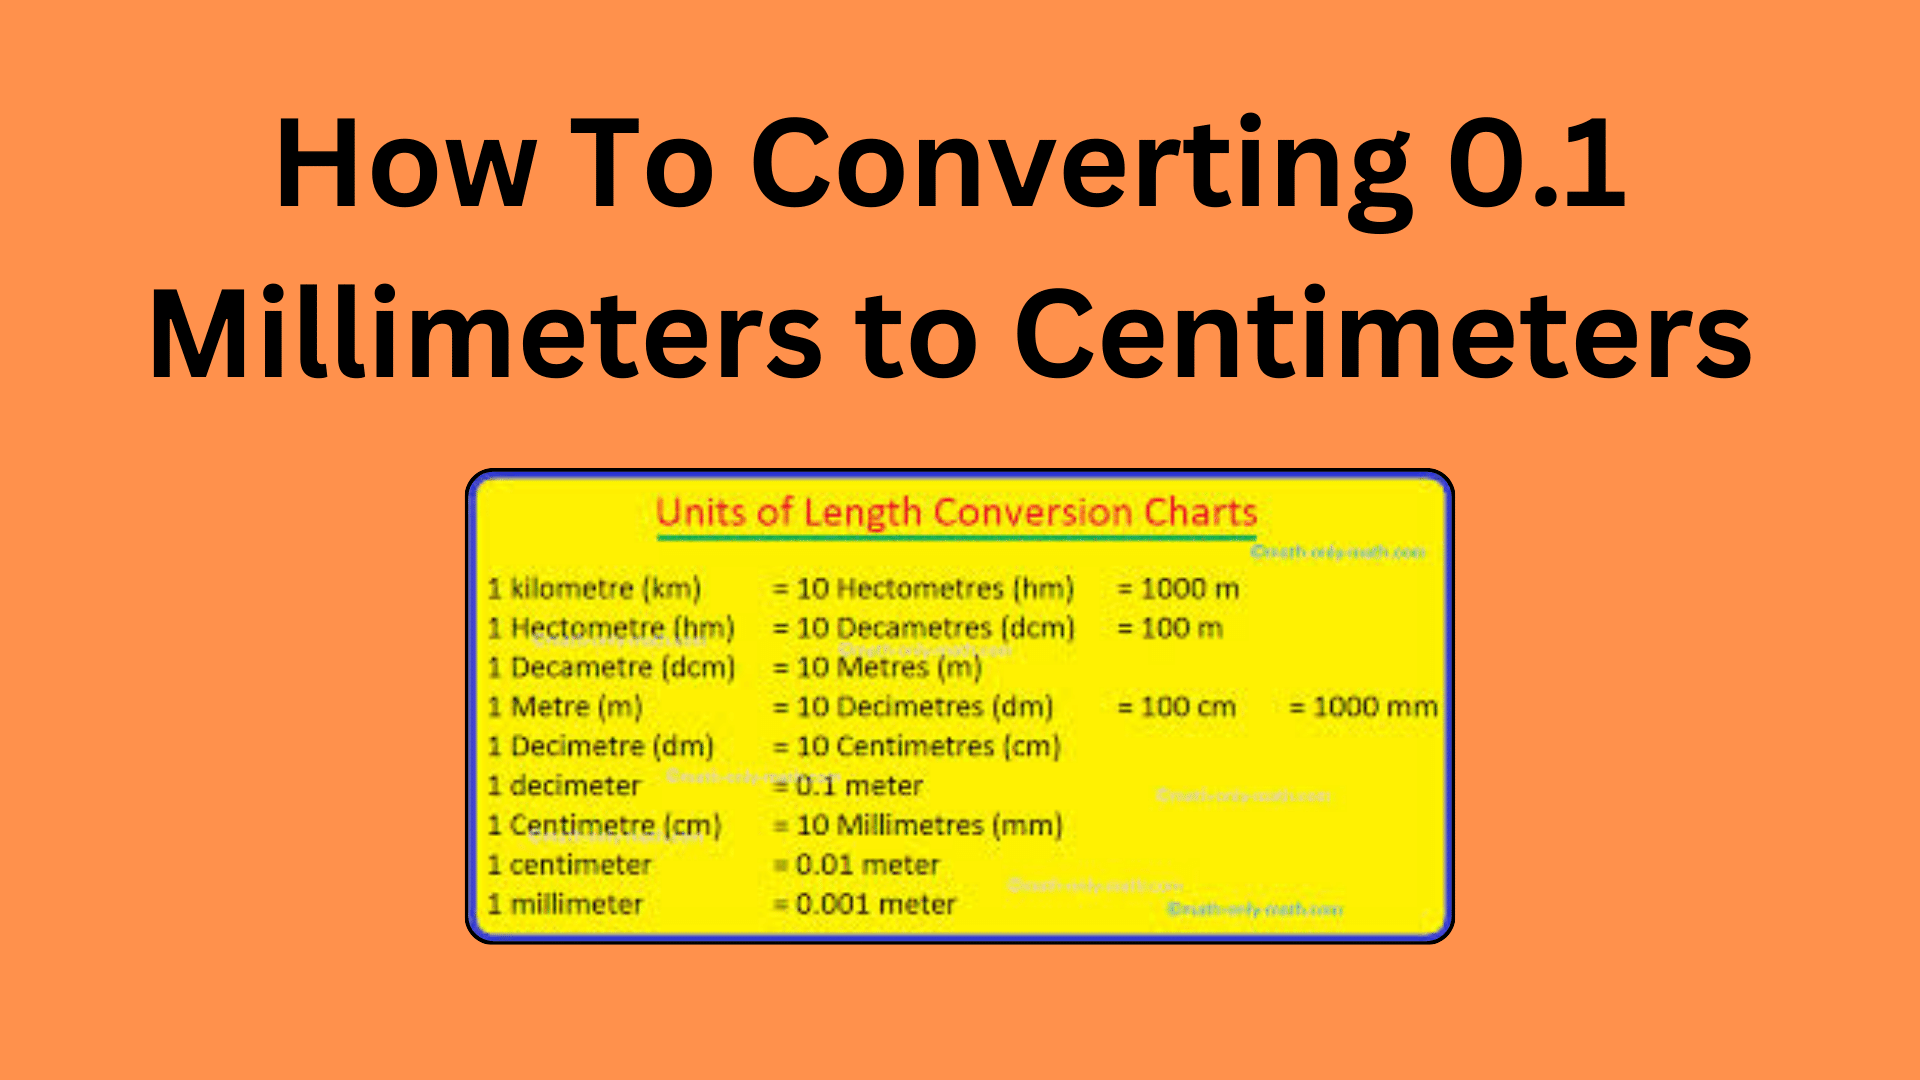 How To Converting 0.1 Millimeters to Centimeters